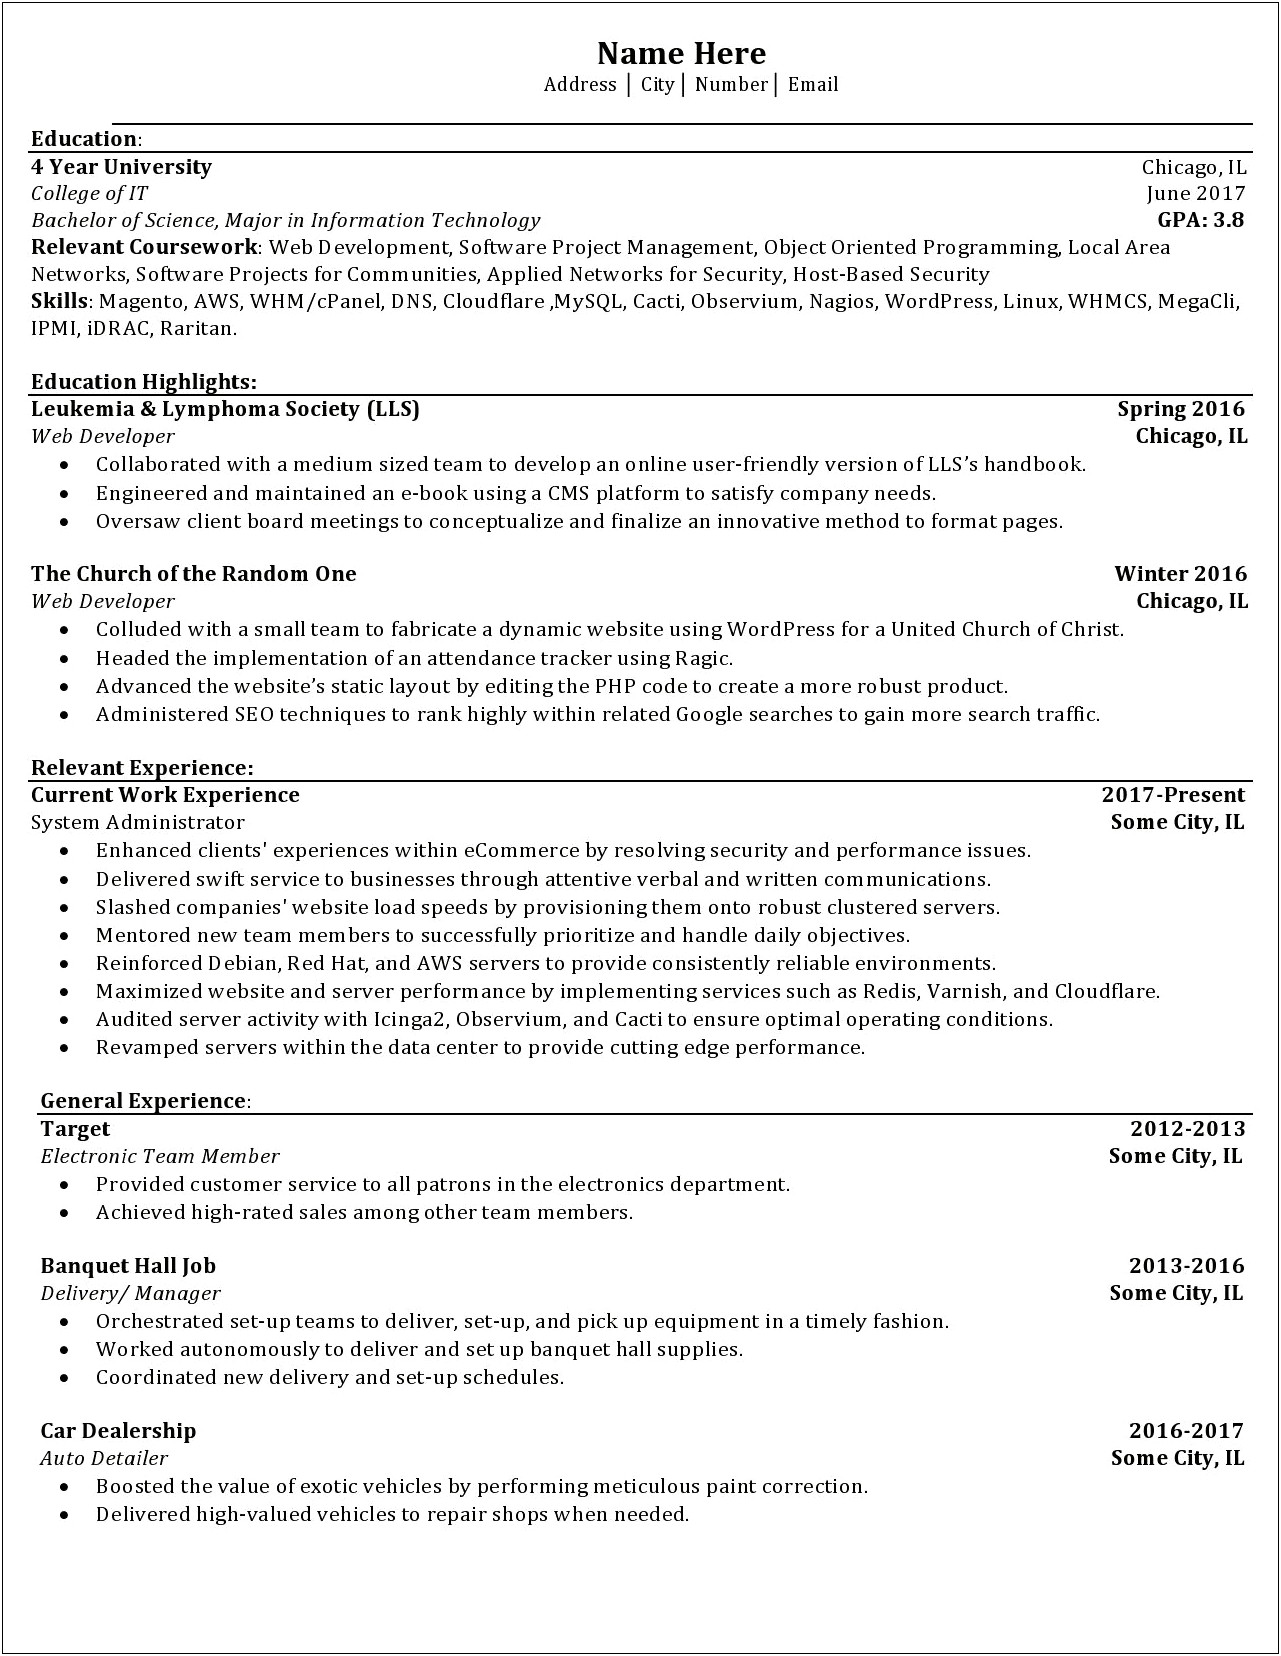 Best Place To Post Resume Online 2017